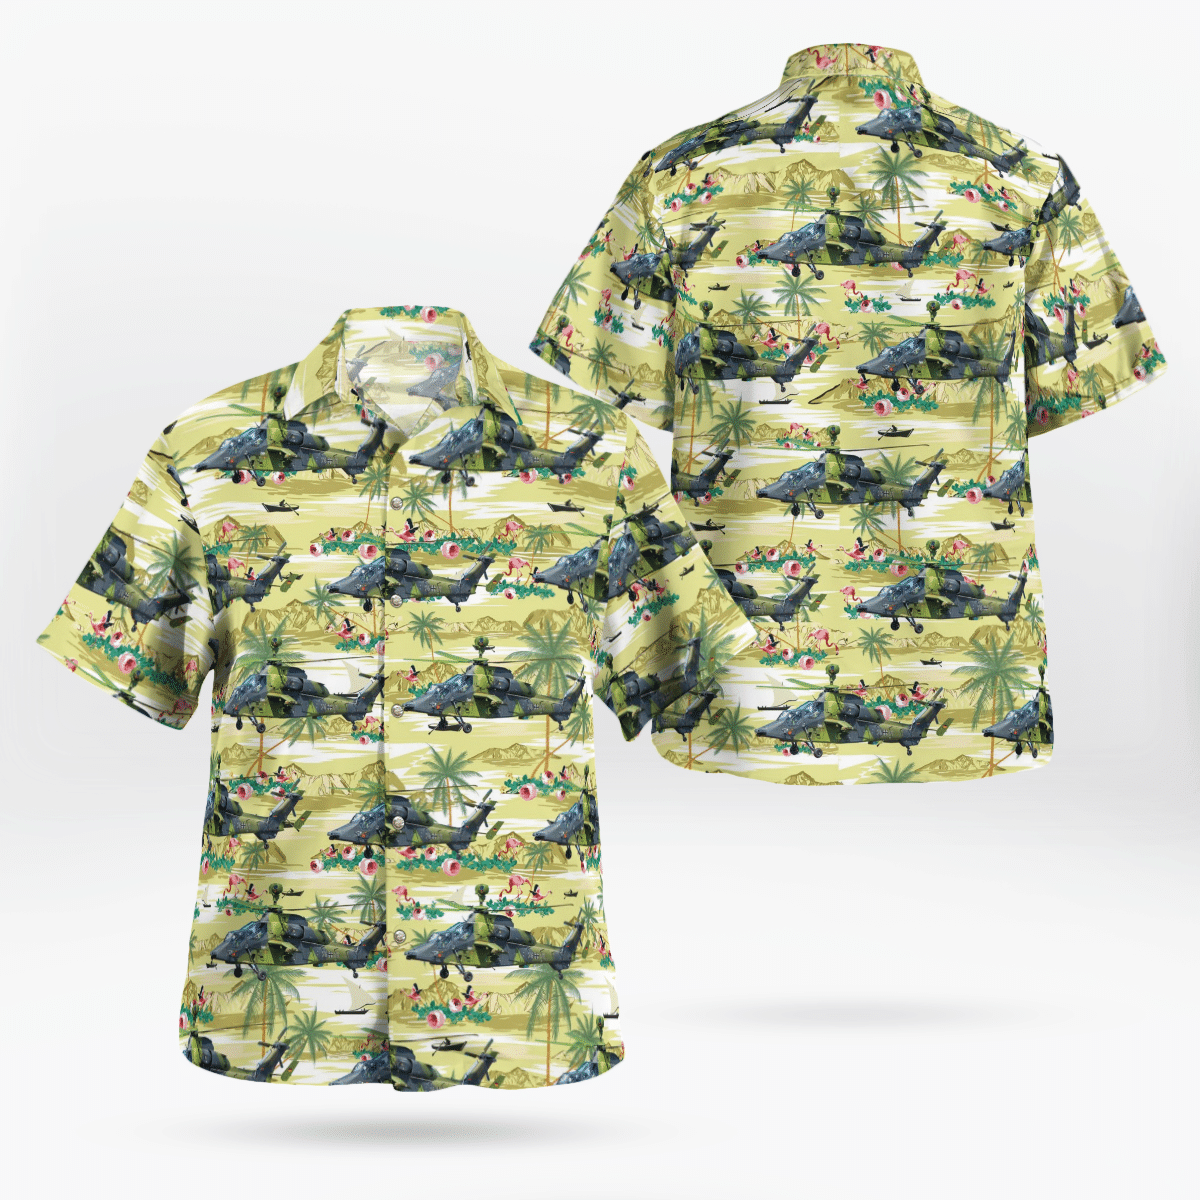 If you are in need of a new summertime look, pick up this Hawaiian shirt 177